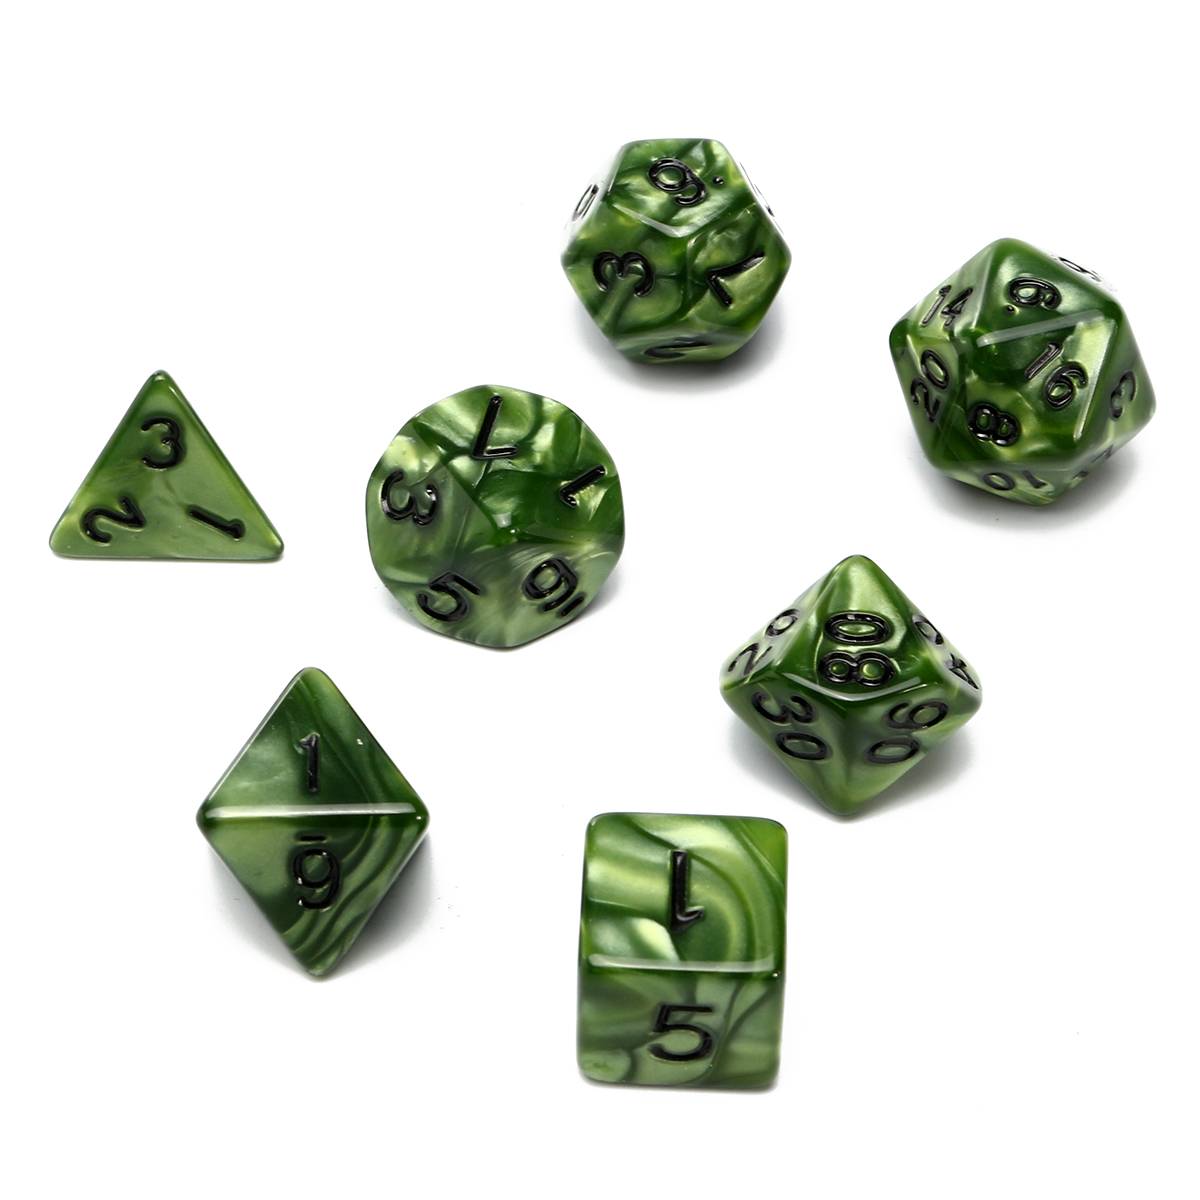 

7 Piece Polyhedral Dice Set Multisided Dice With Dice Bag RPG Role Playing Games Dices Green